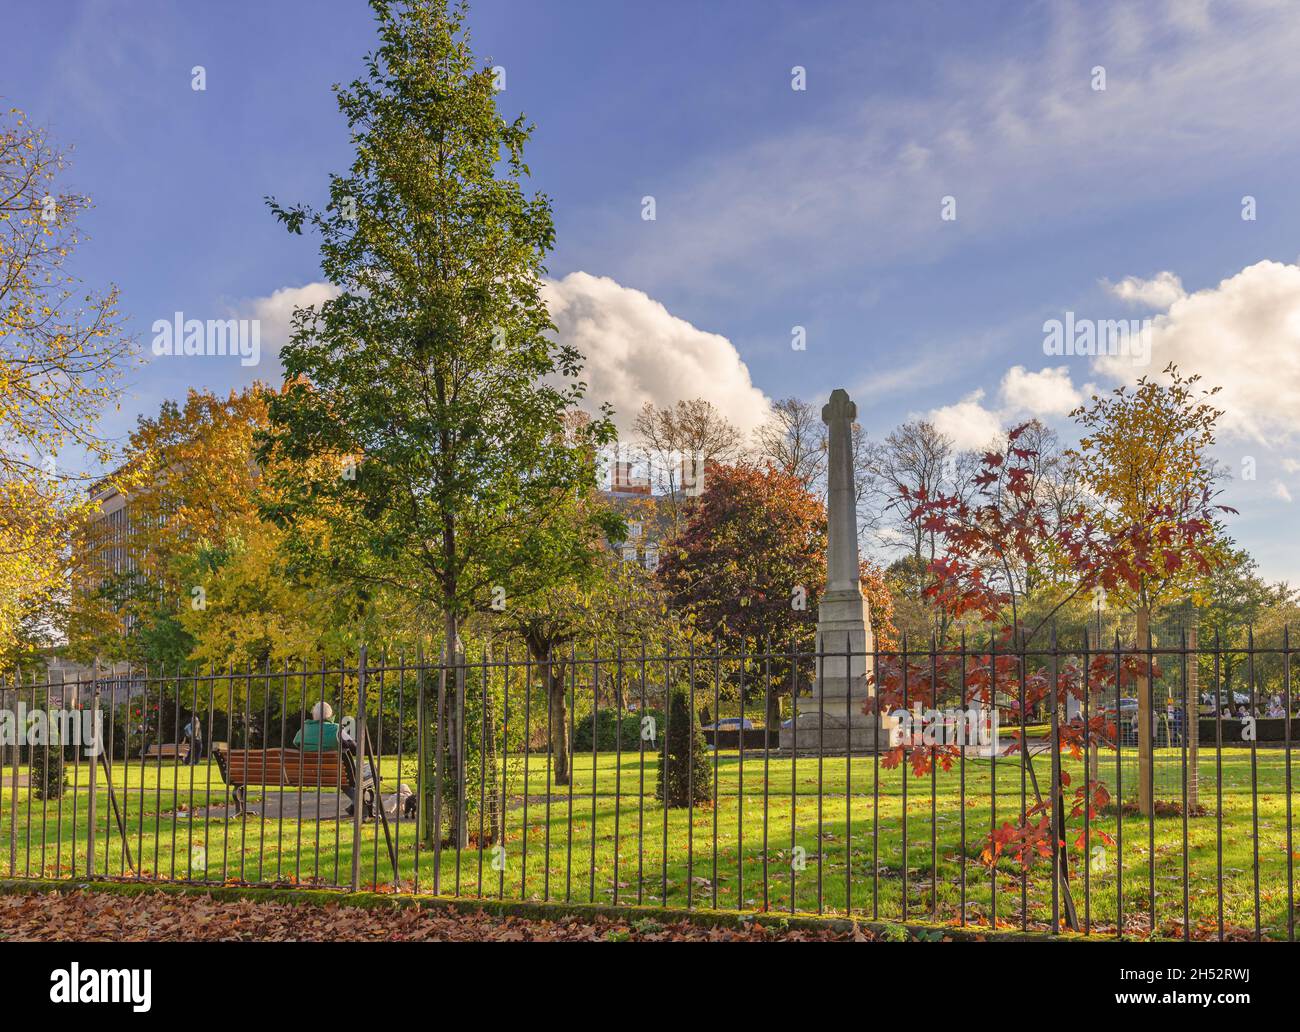 A public garden for remembrance in Autumn. A man sits on a bench and a cenotaph is in the centre of the park. A sky with cloud is above. Stock Photo